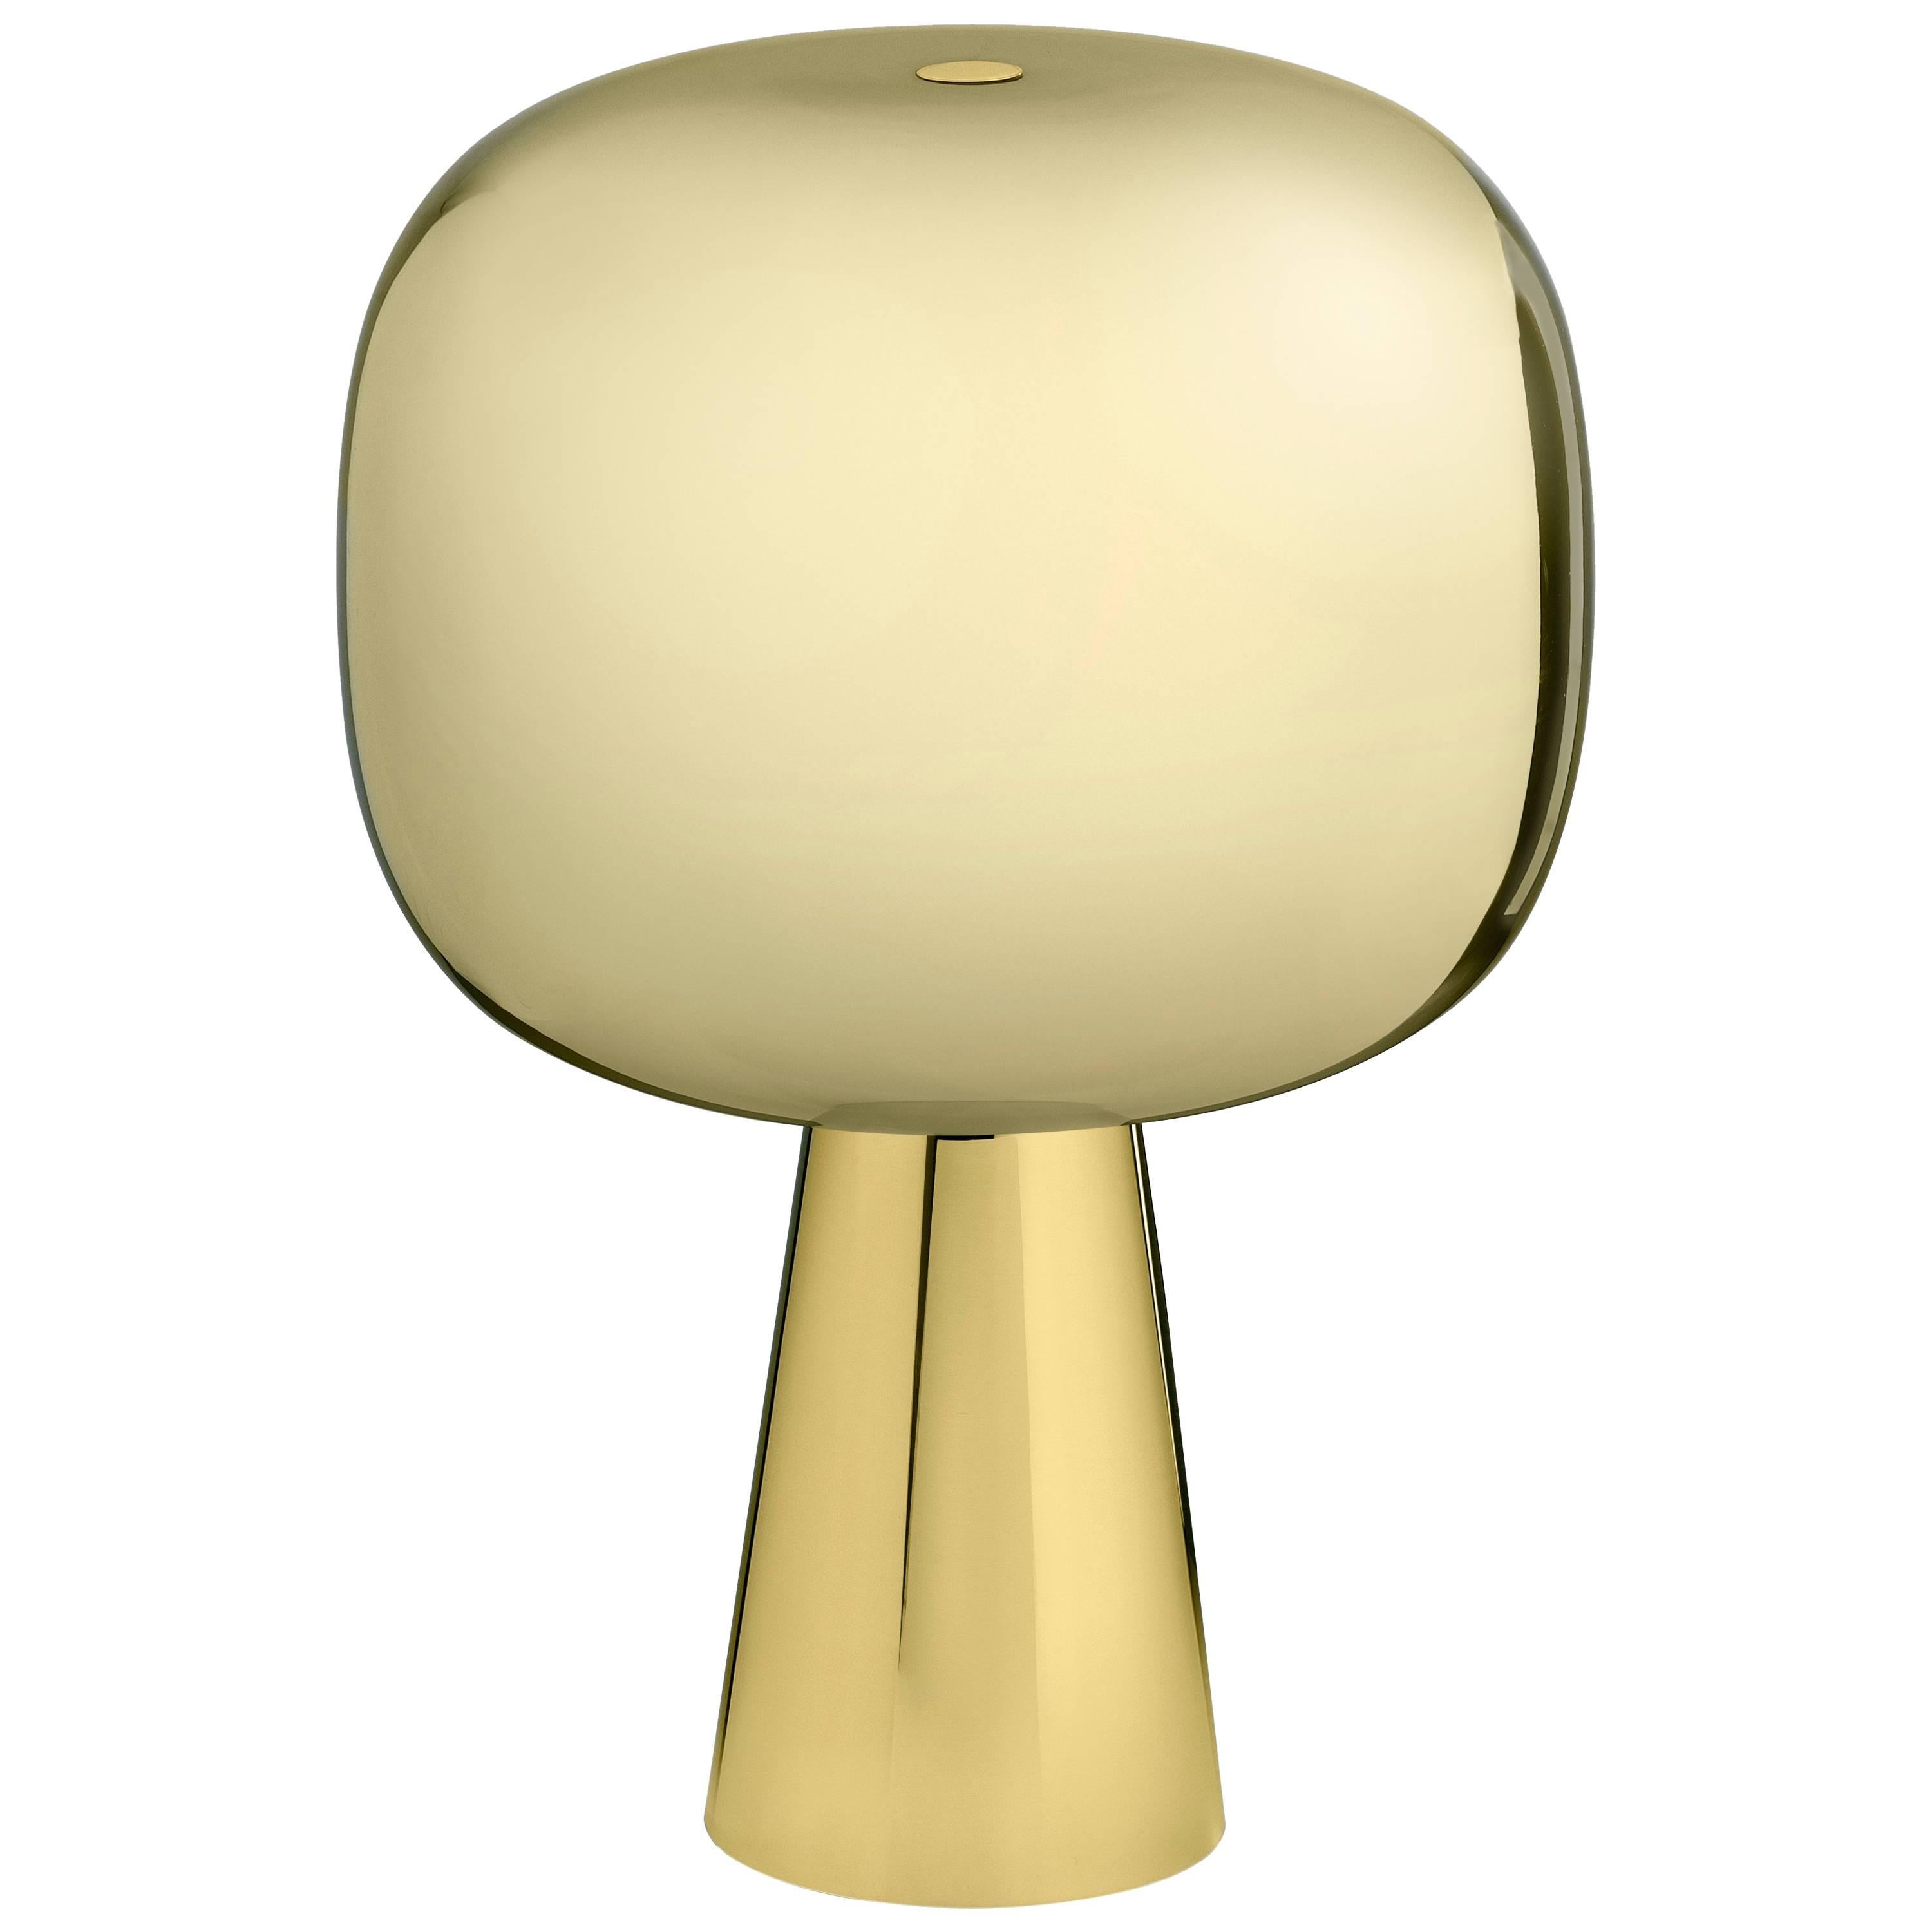 Ghidini 1961 Dusk Dawn Table Lamp a in Polished Brass Finish For Sale